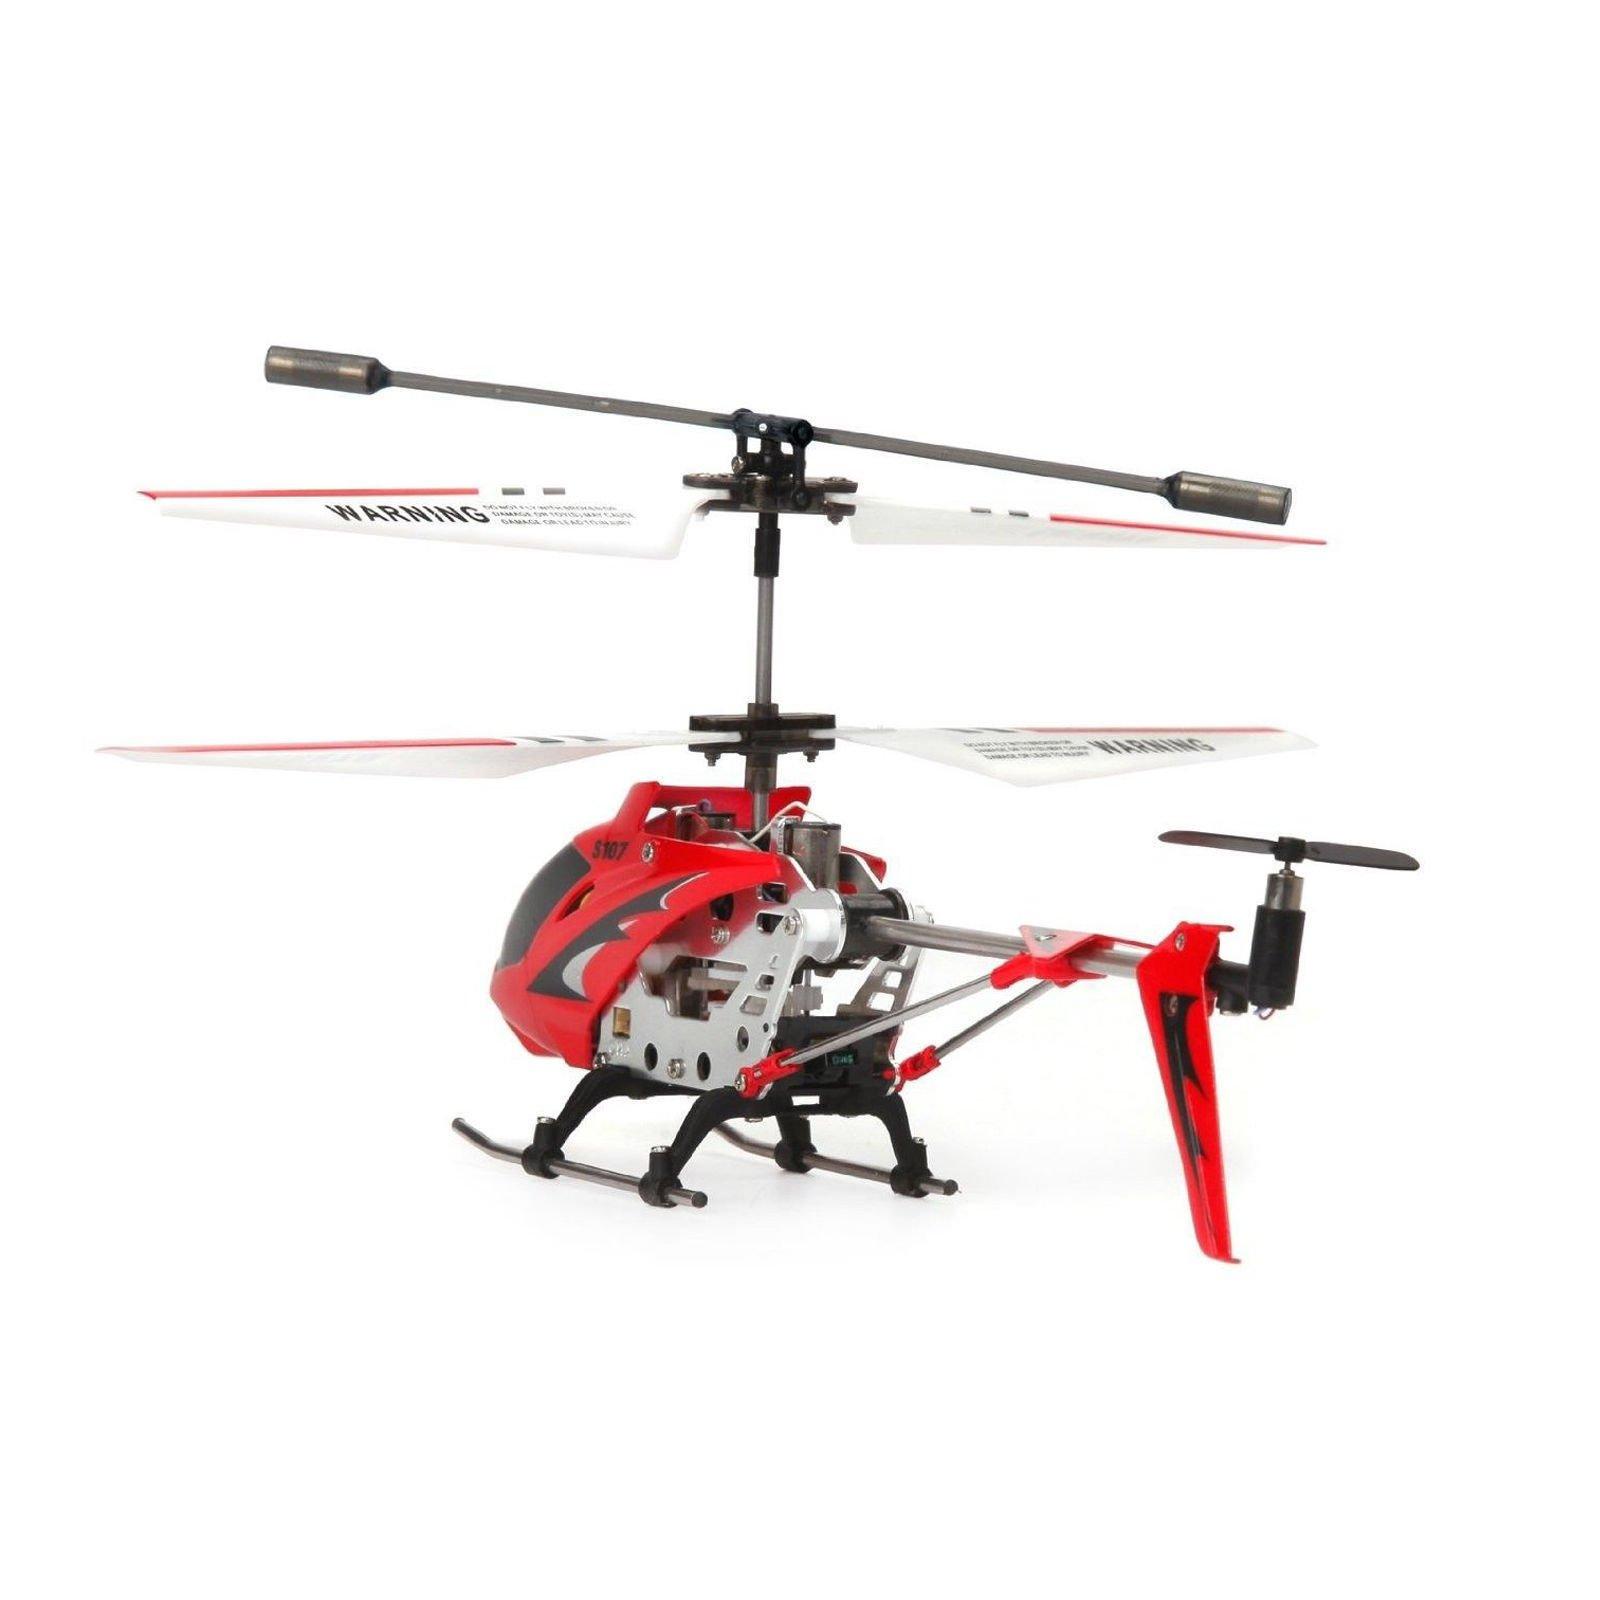 Syma S107 S107G Rc Helicopter With Gyro Red:  Rocket The Pros and Cons of the Syma S107/S107G RC Helicopter